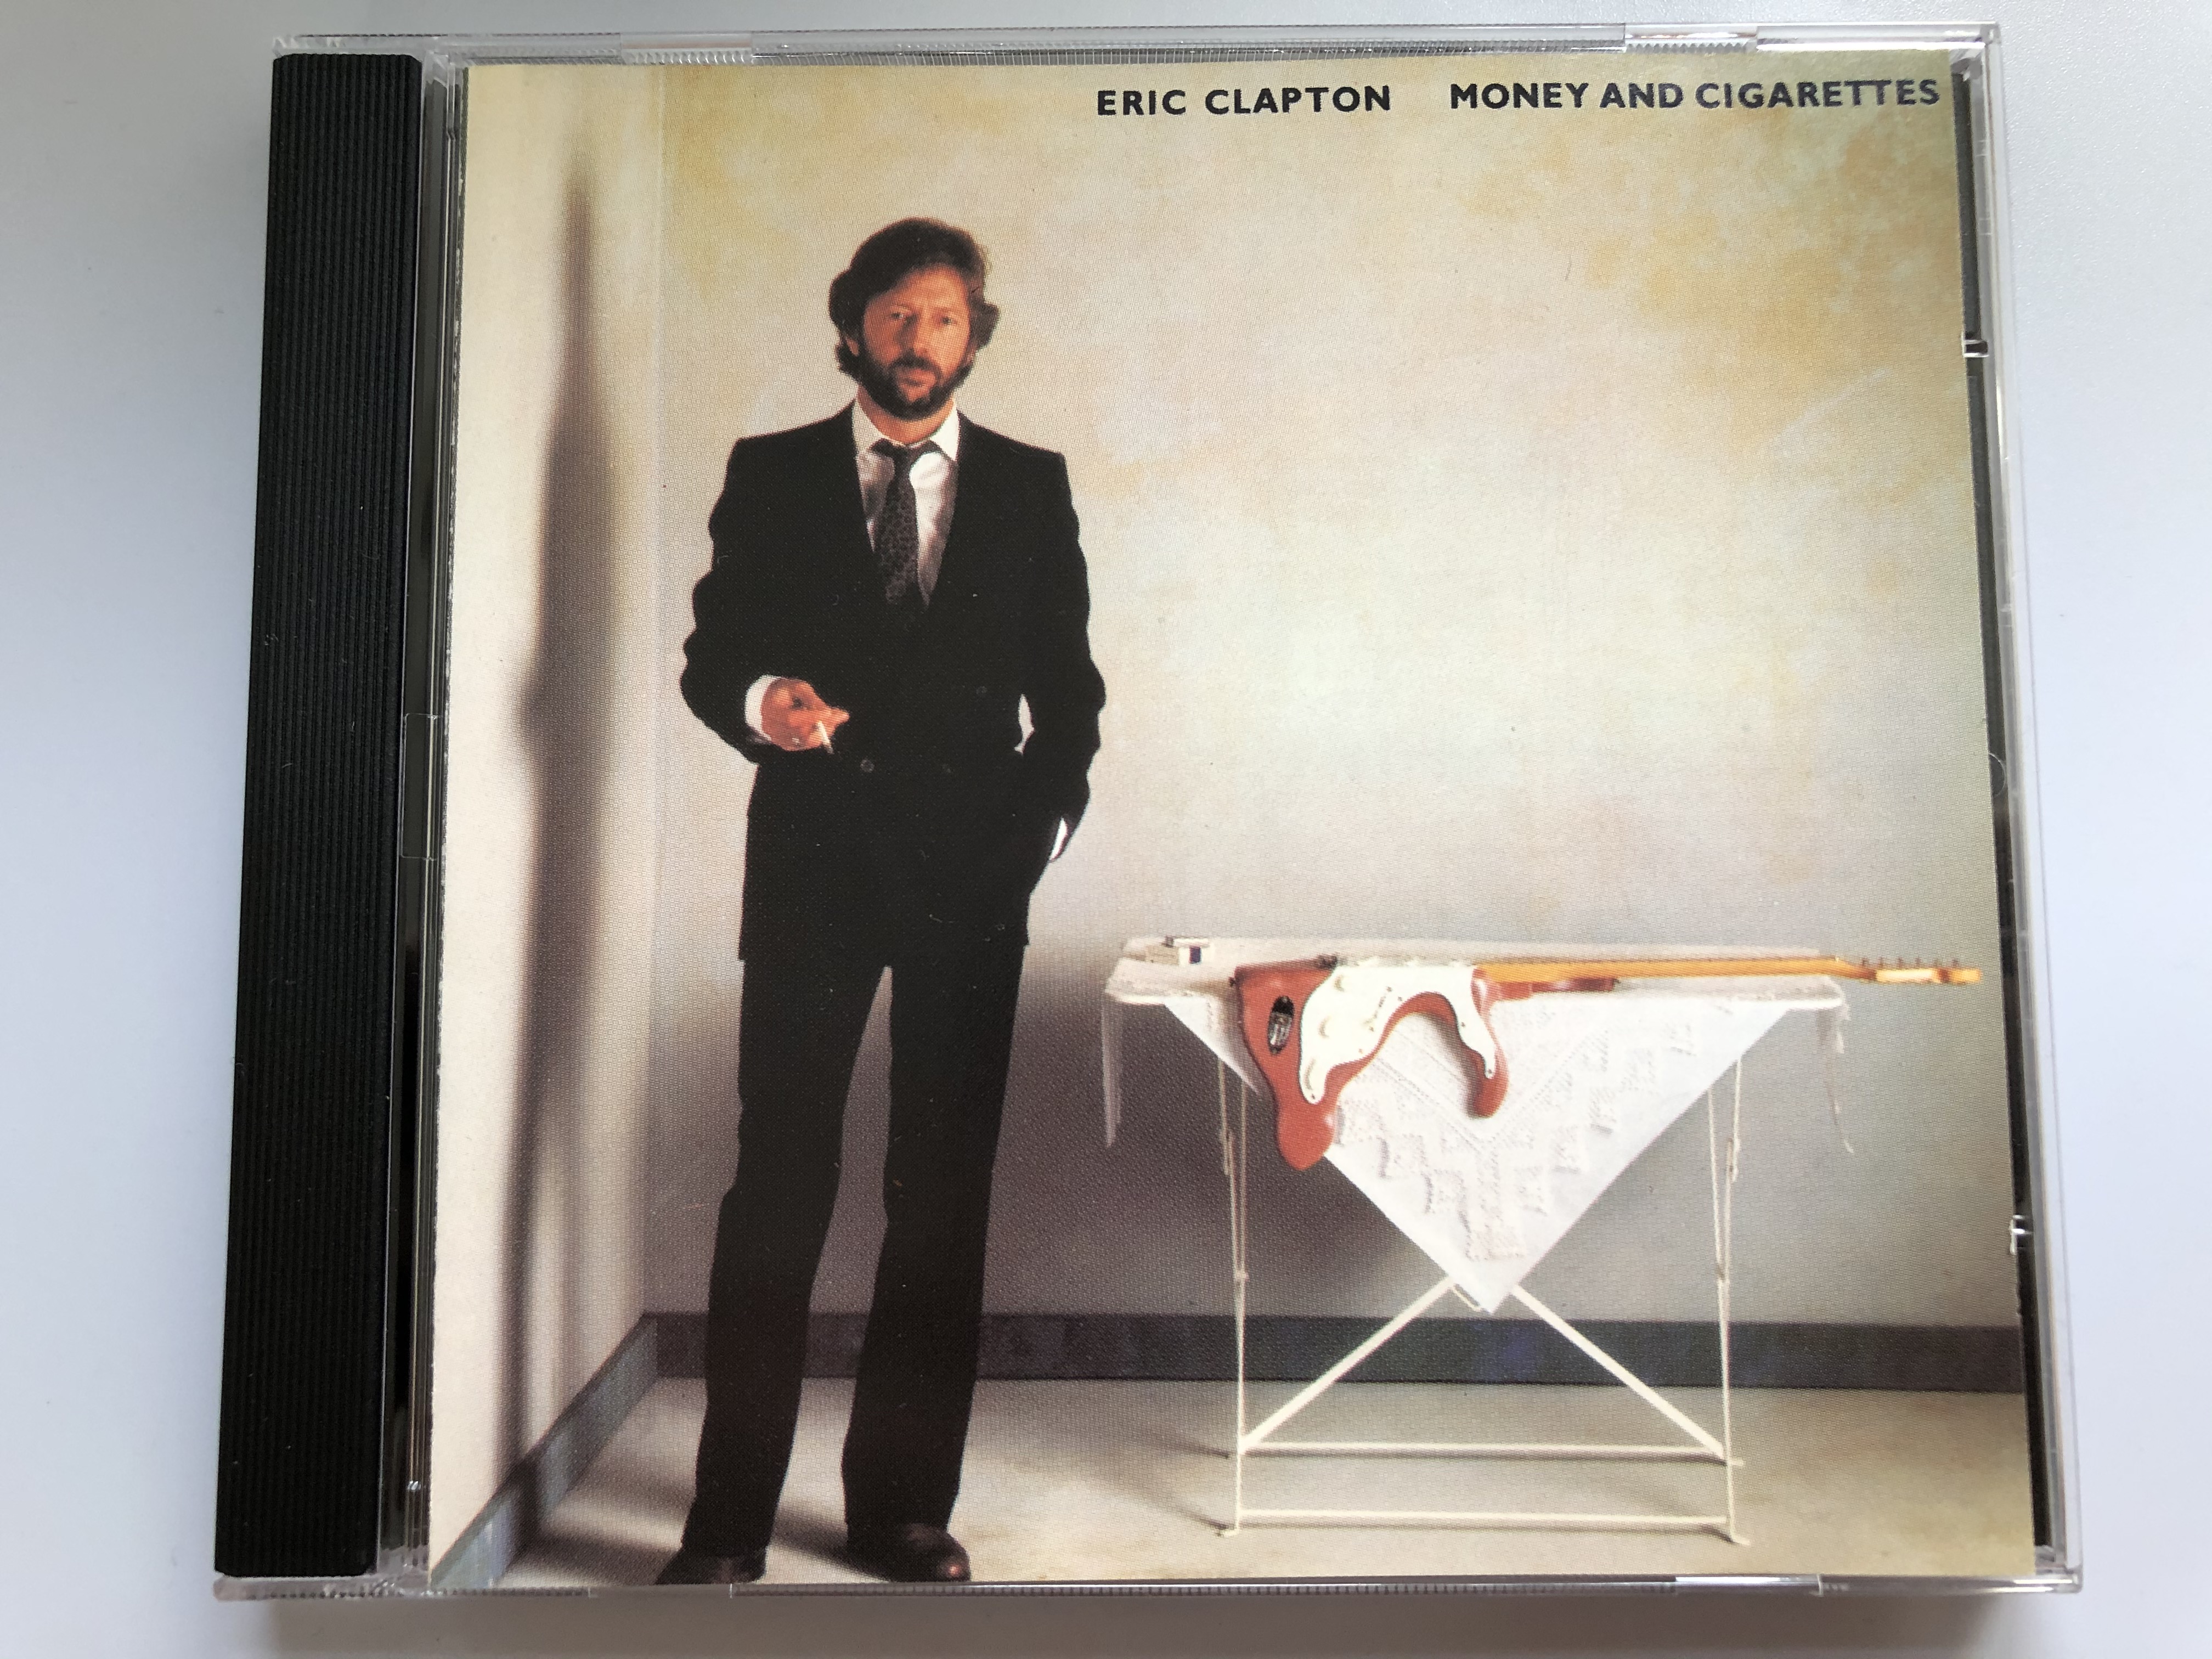 eric-clapton-money-and-cigarettes-warner-bros.-records-audio-cd-7599-23773-2-1-.jpg